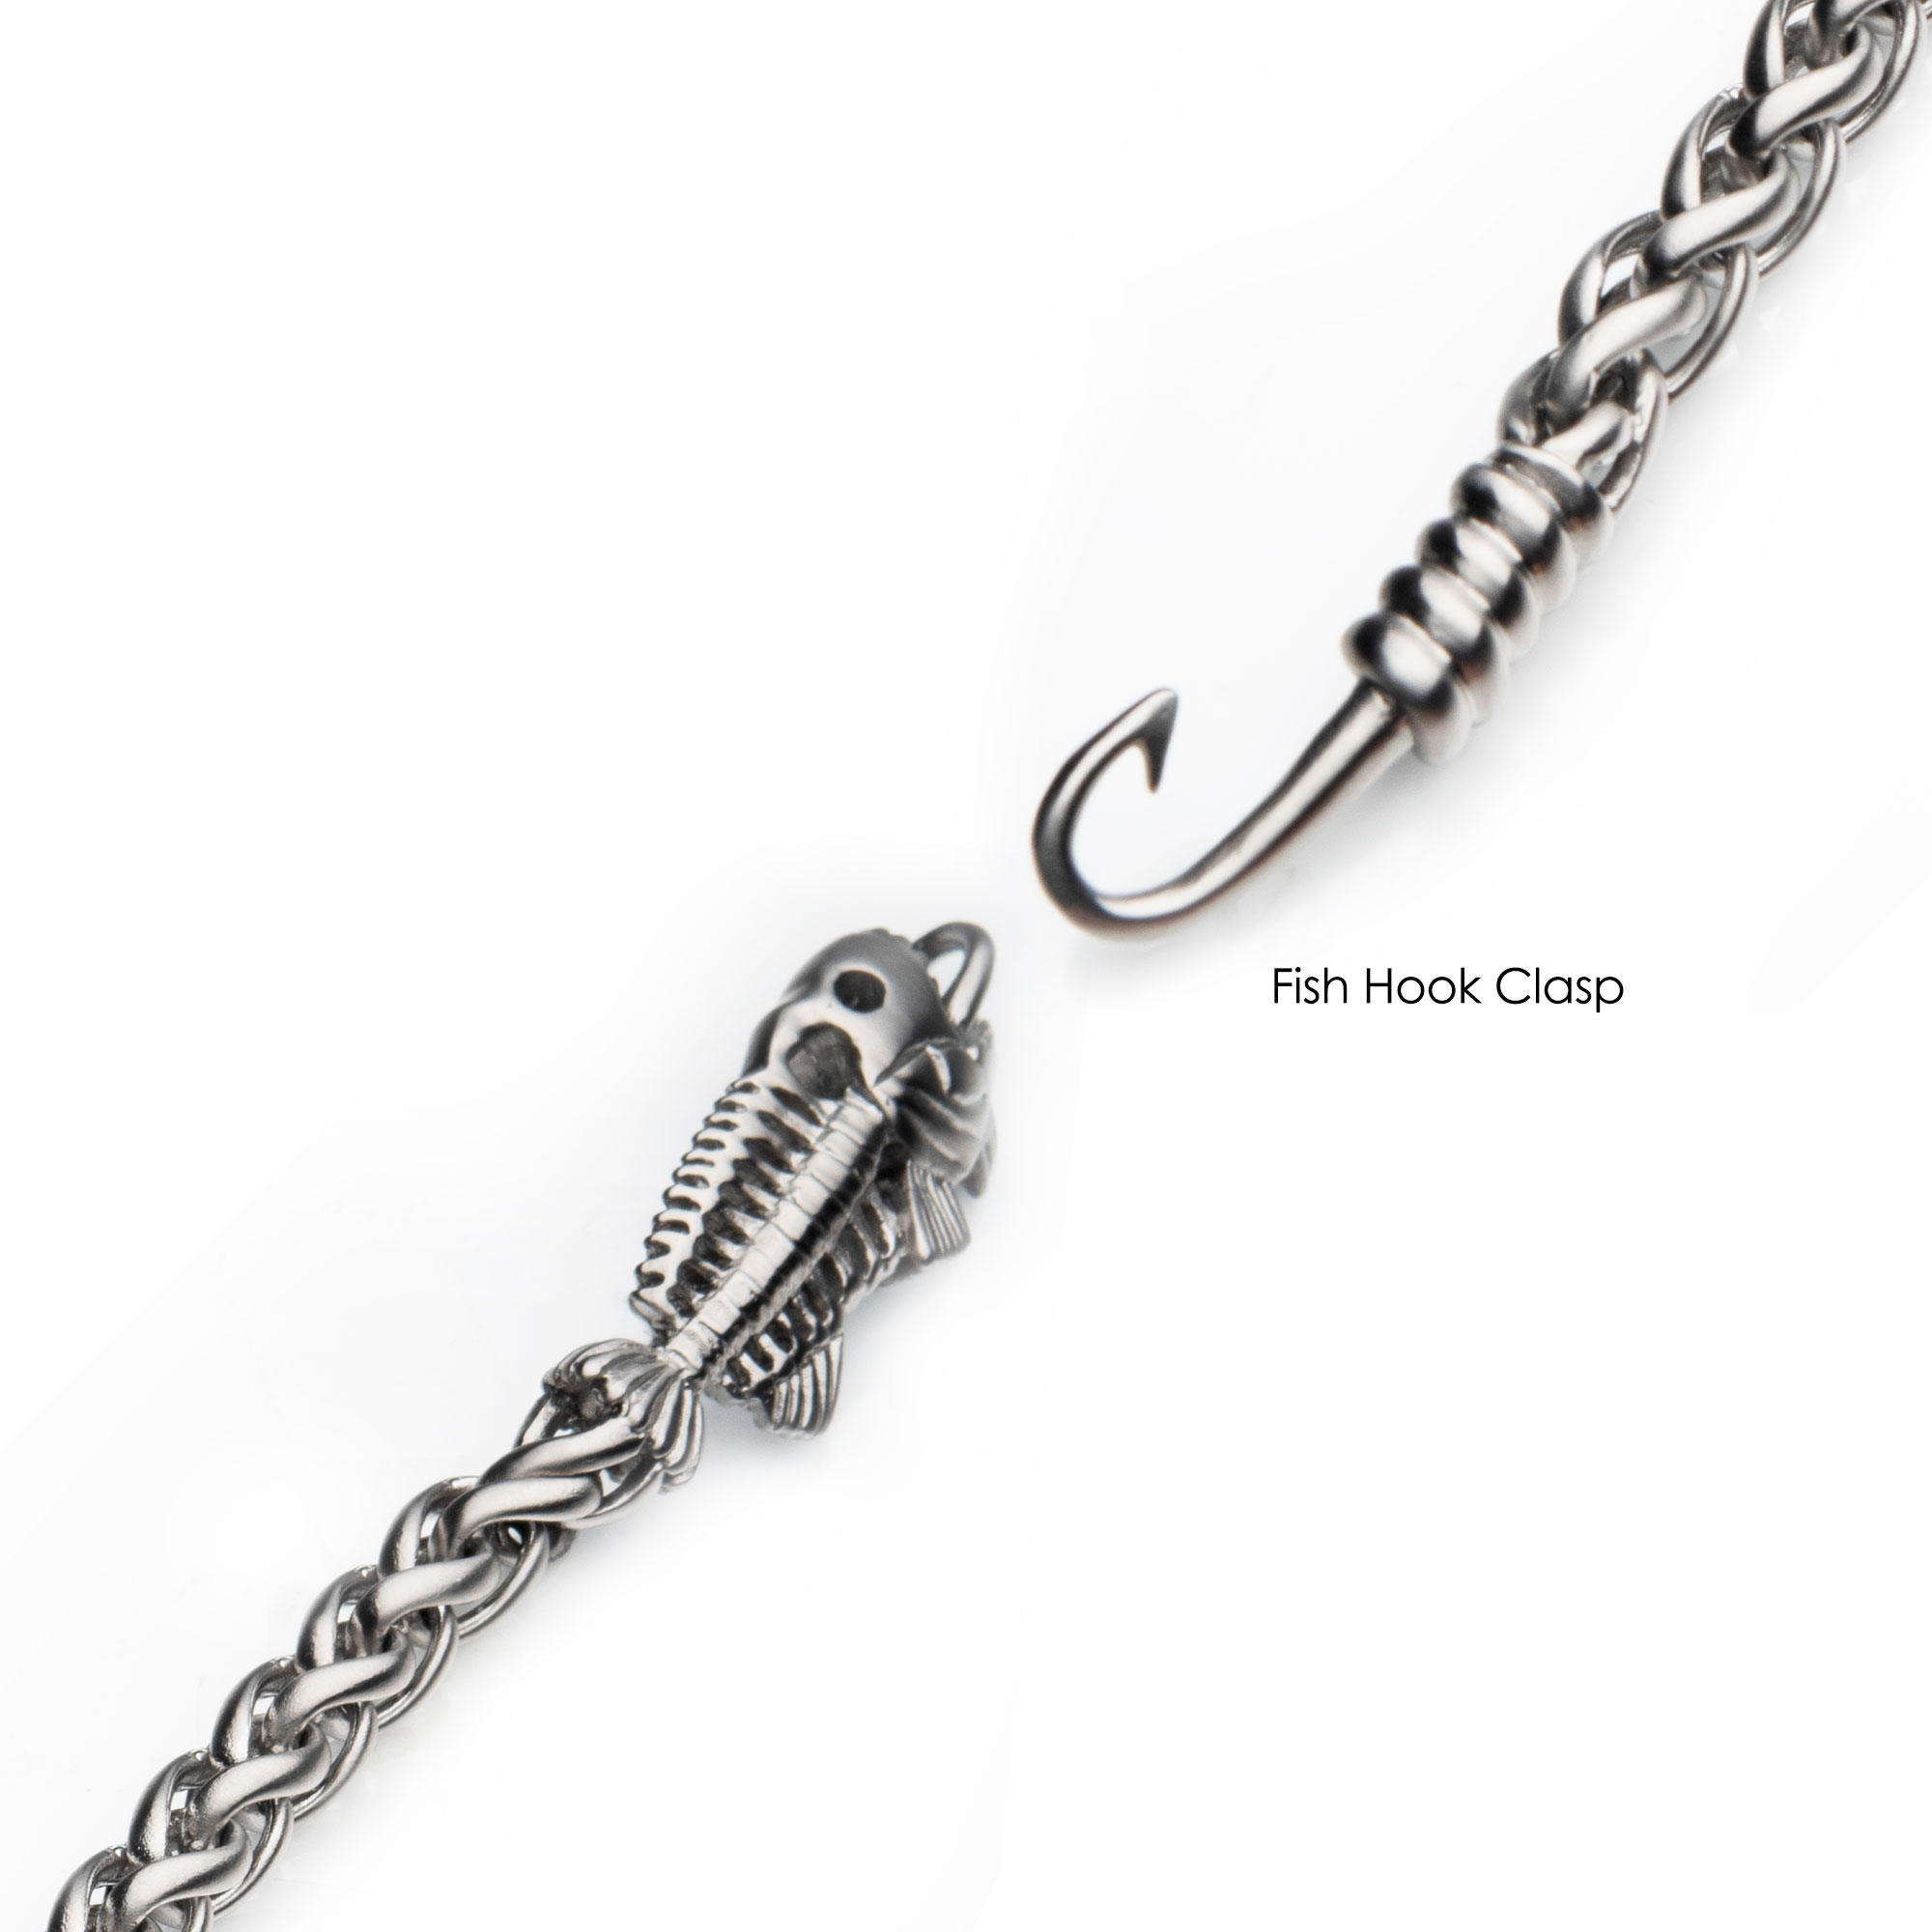 Polished Steel Wheat Chain with Fishbone on Hook Clasp Bracelet Image 3 Enchanted Jewelry Plainfield, CT